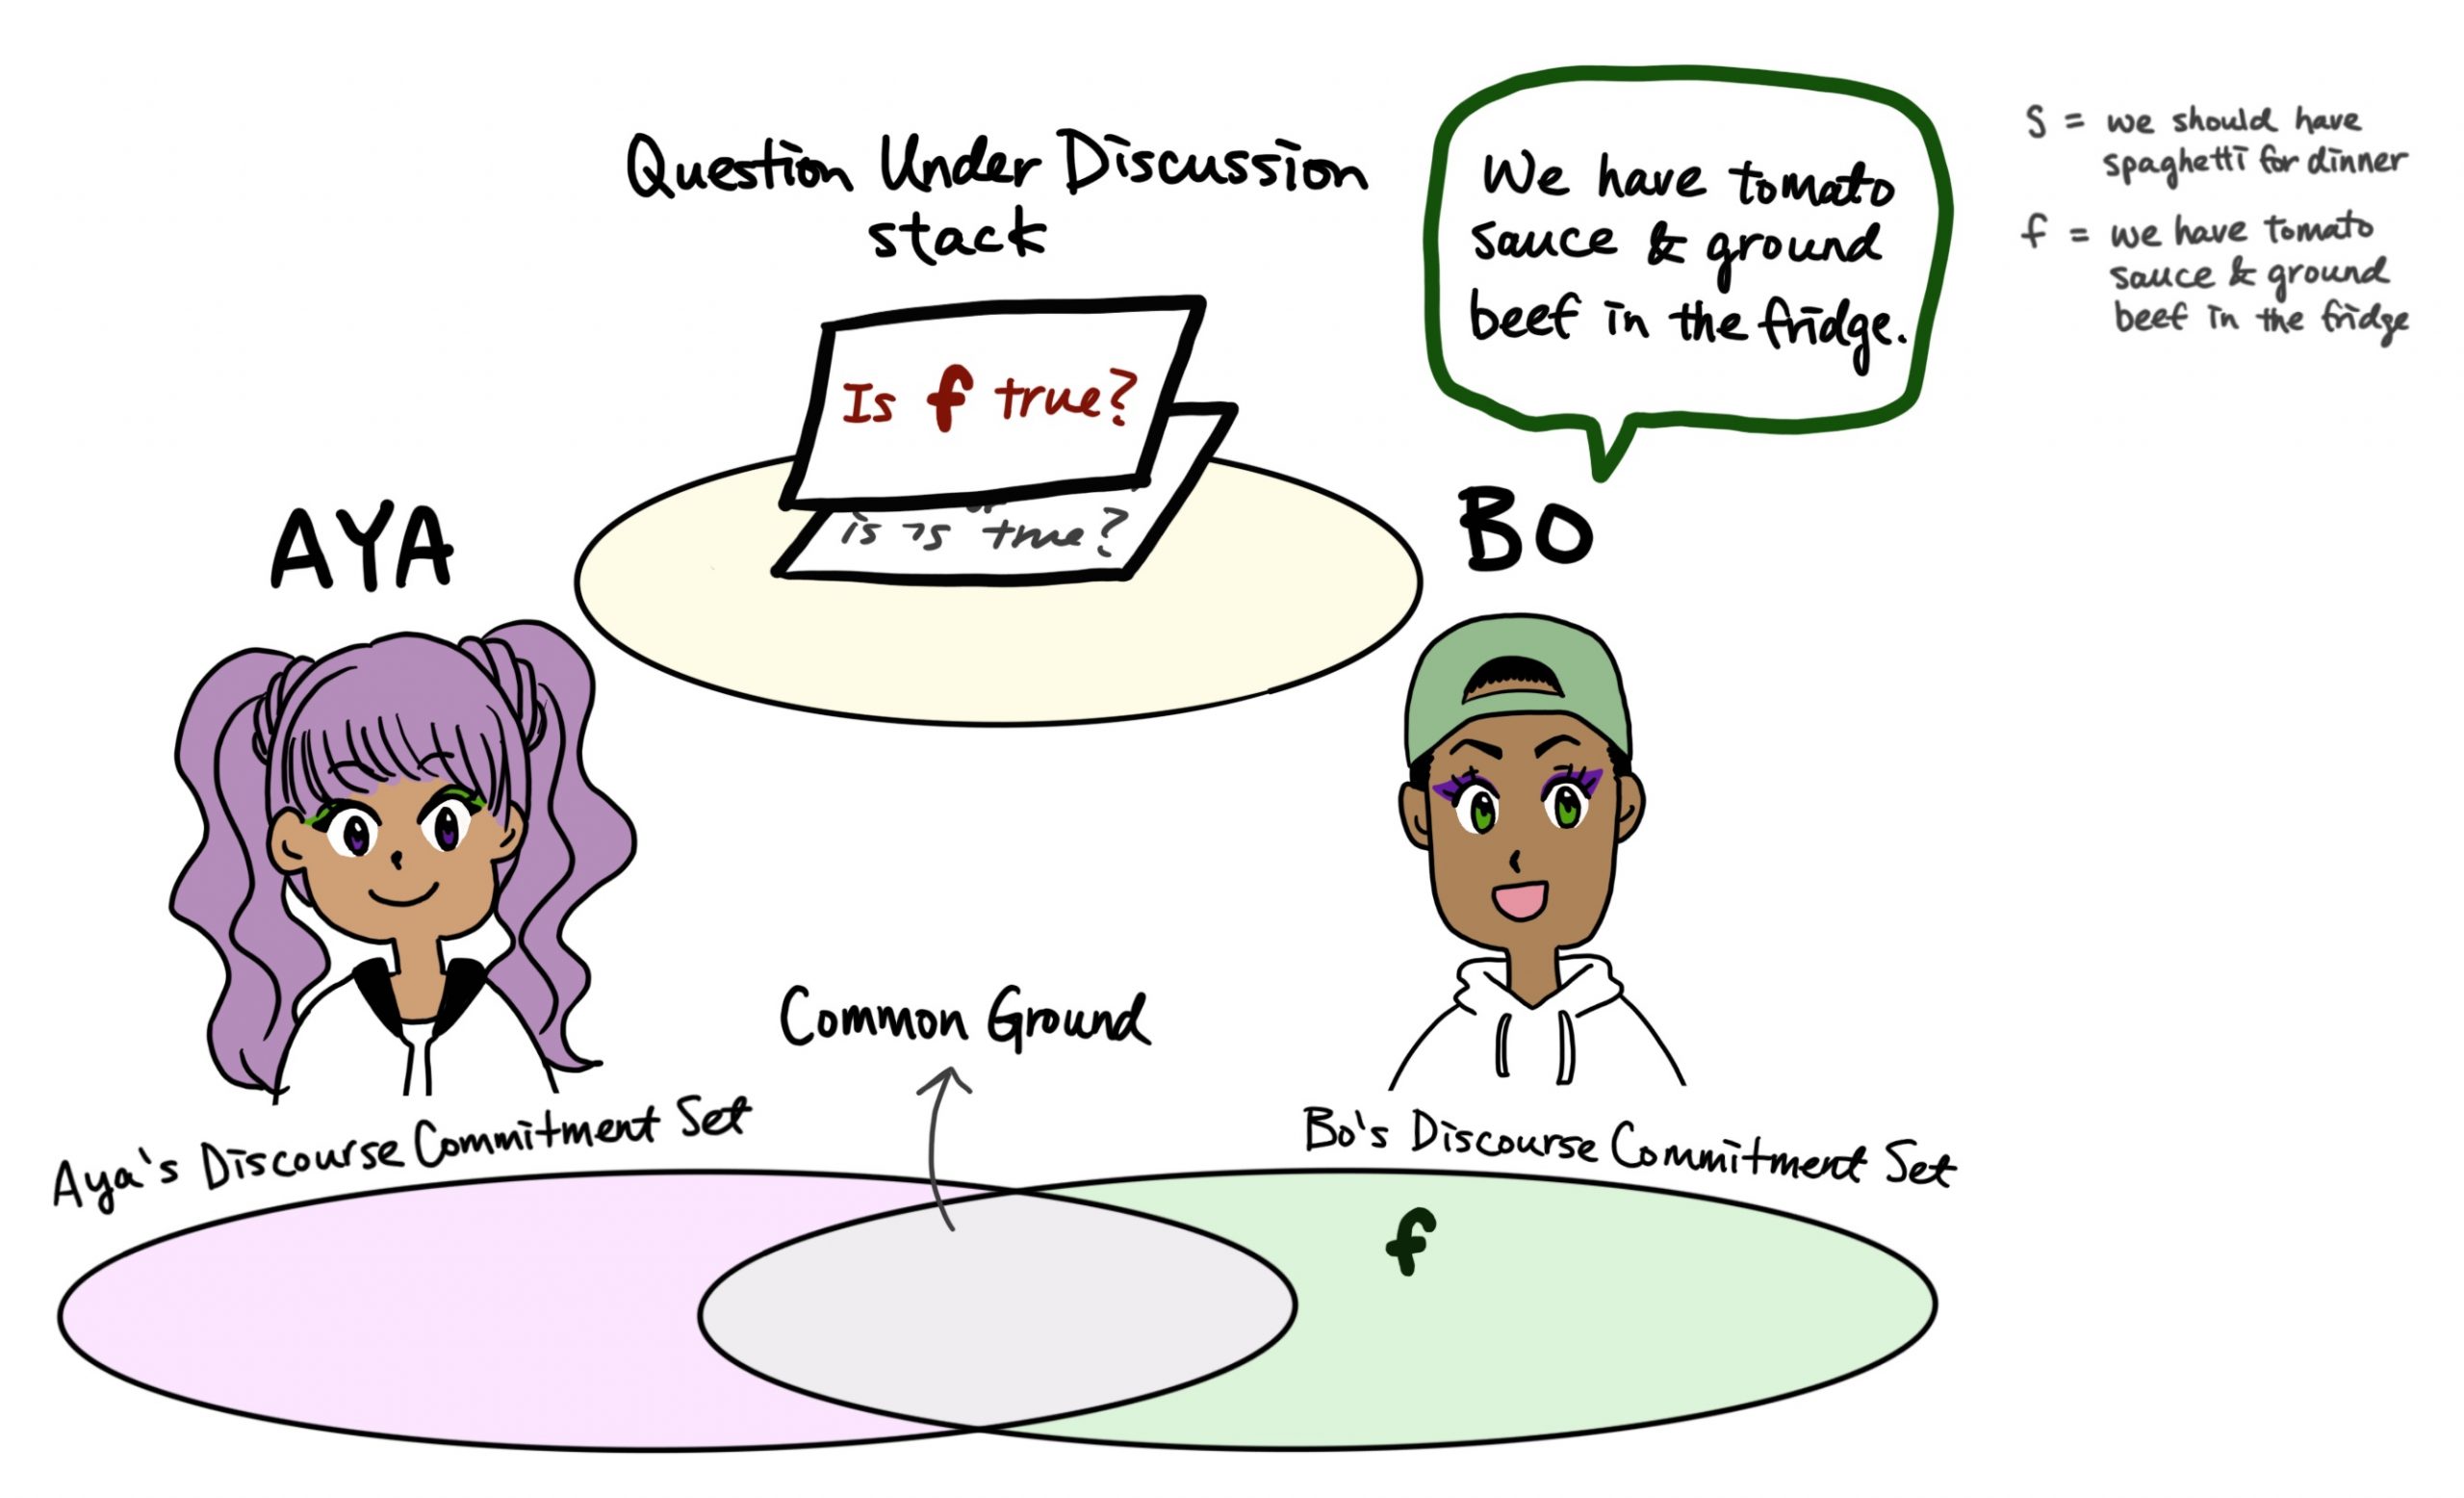  Illustration of the context with Aya and Bo as interlocutors. The illustration shows Aya's and Bo's Discourse Commitment Sets, the Common Ground, and the Question Under Discussion stack. The question "is f true?" gets added to the top of the QUD stack. f gets added to Bo's DC set.